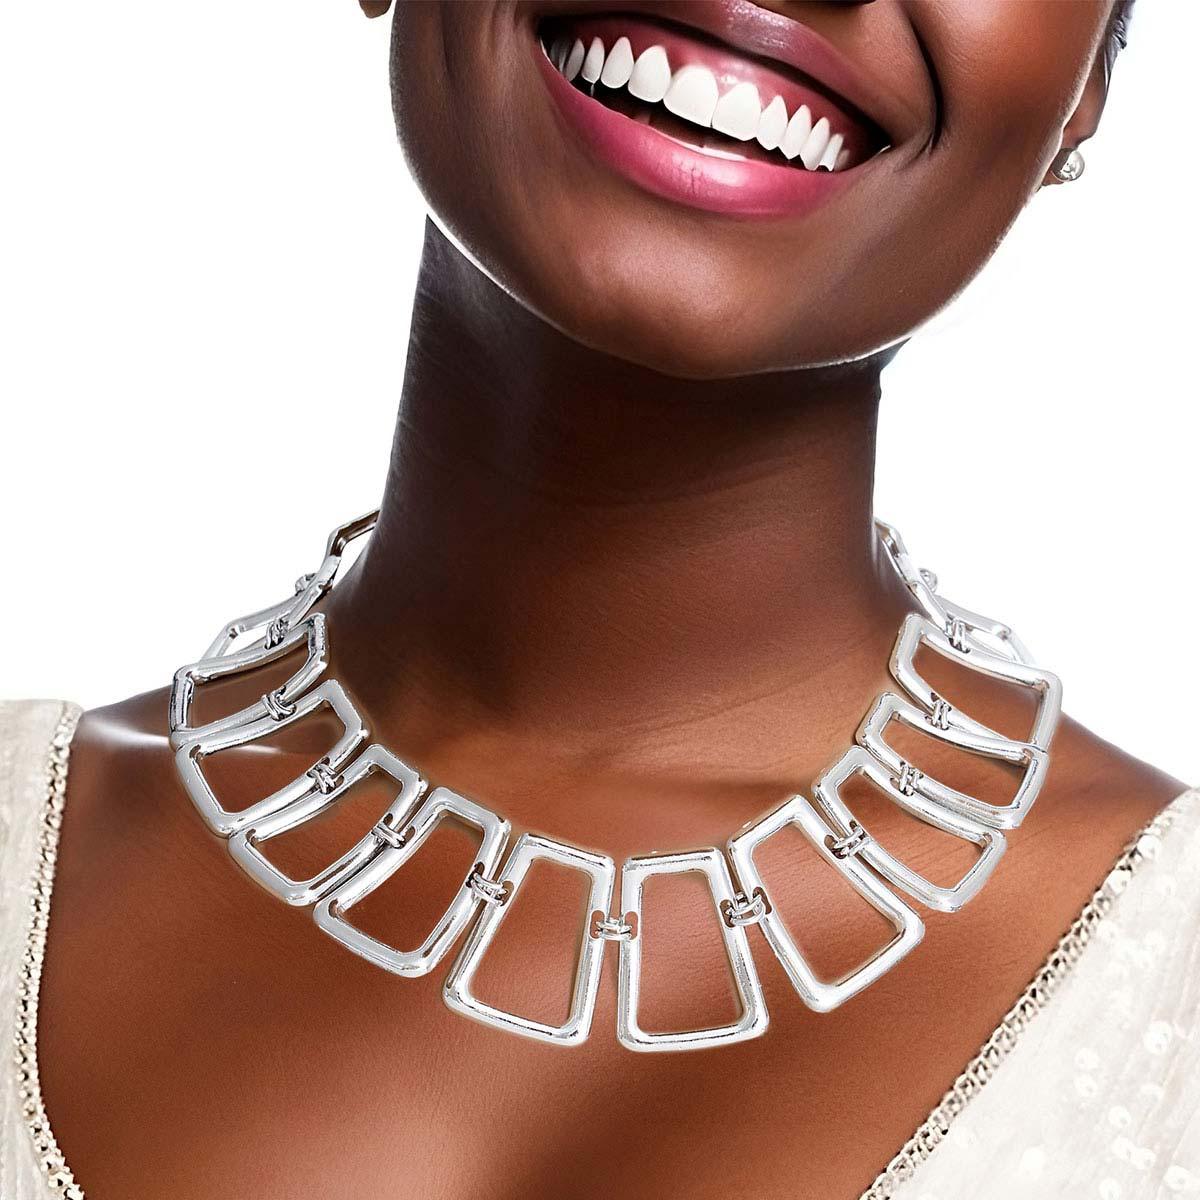 Shop Now: Open Work Link Necklace Set in Silver Plated